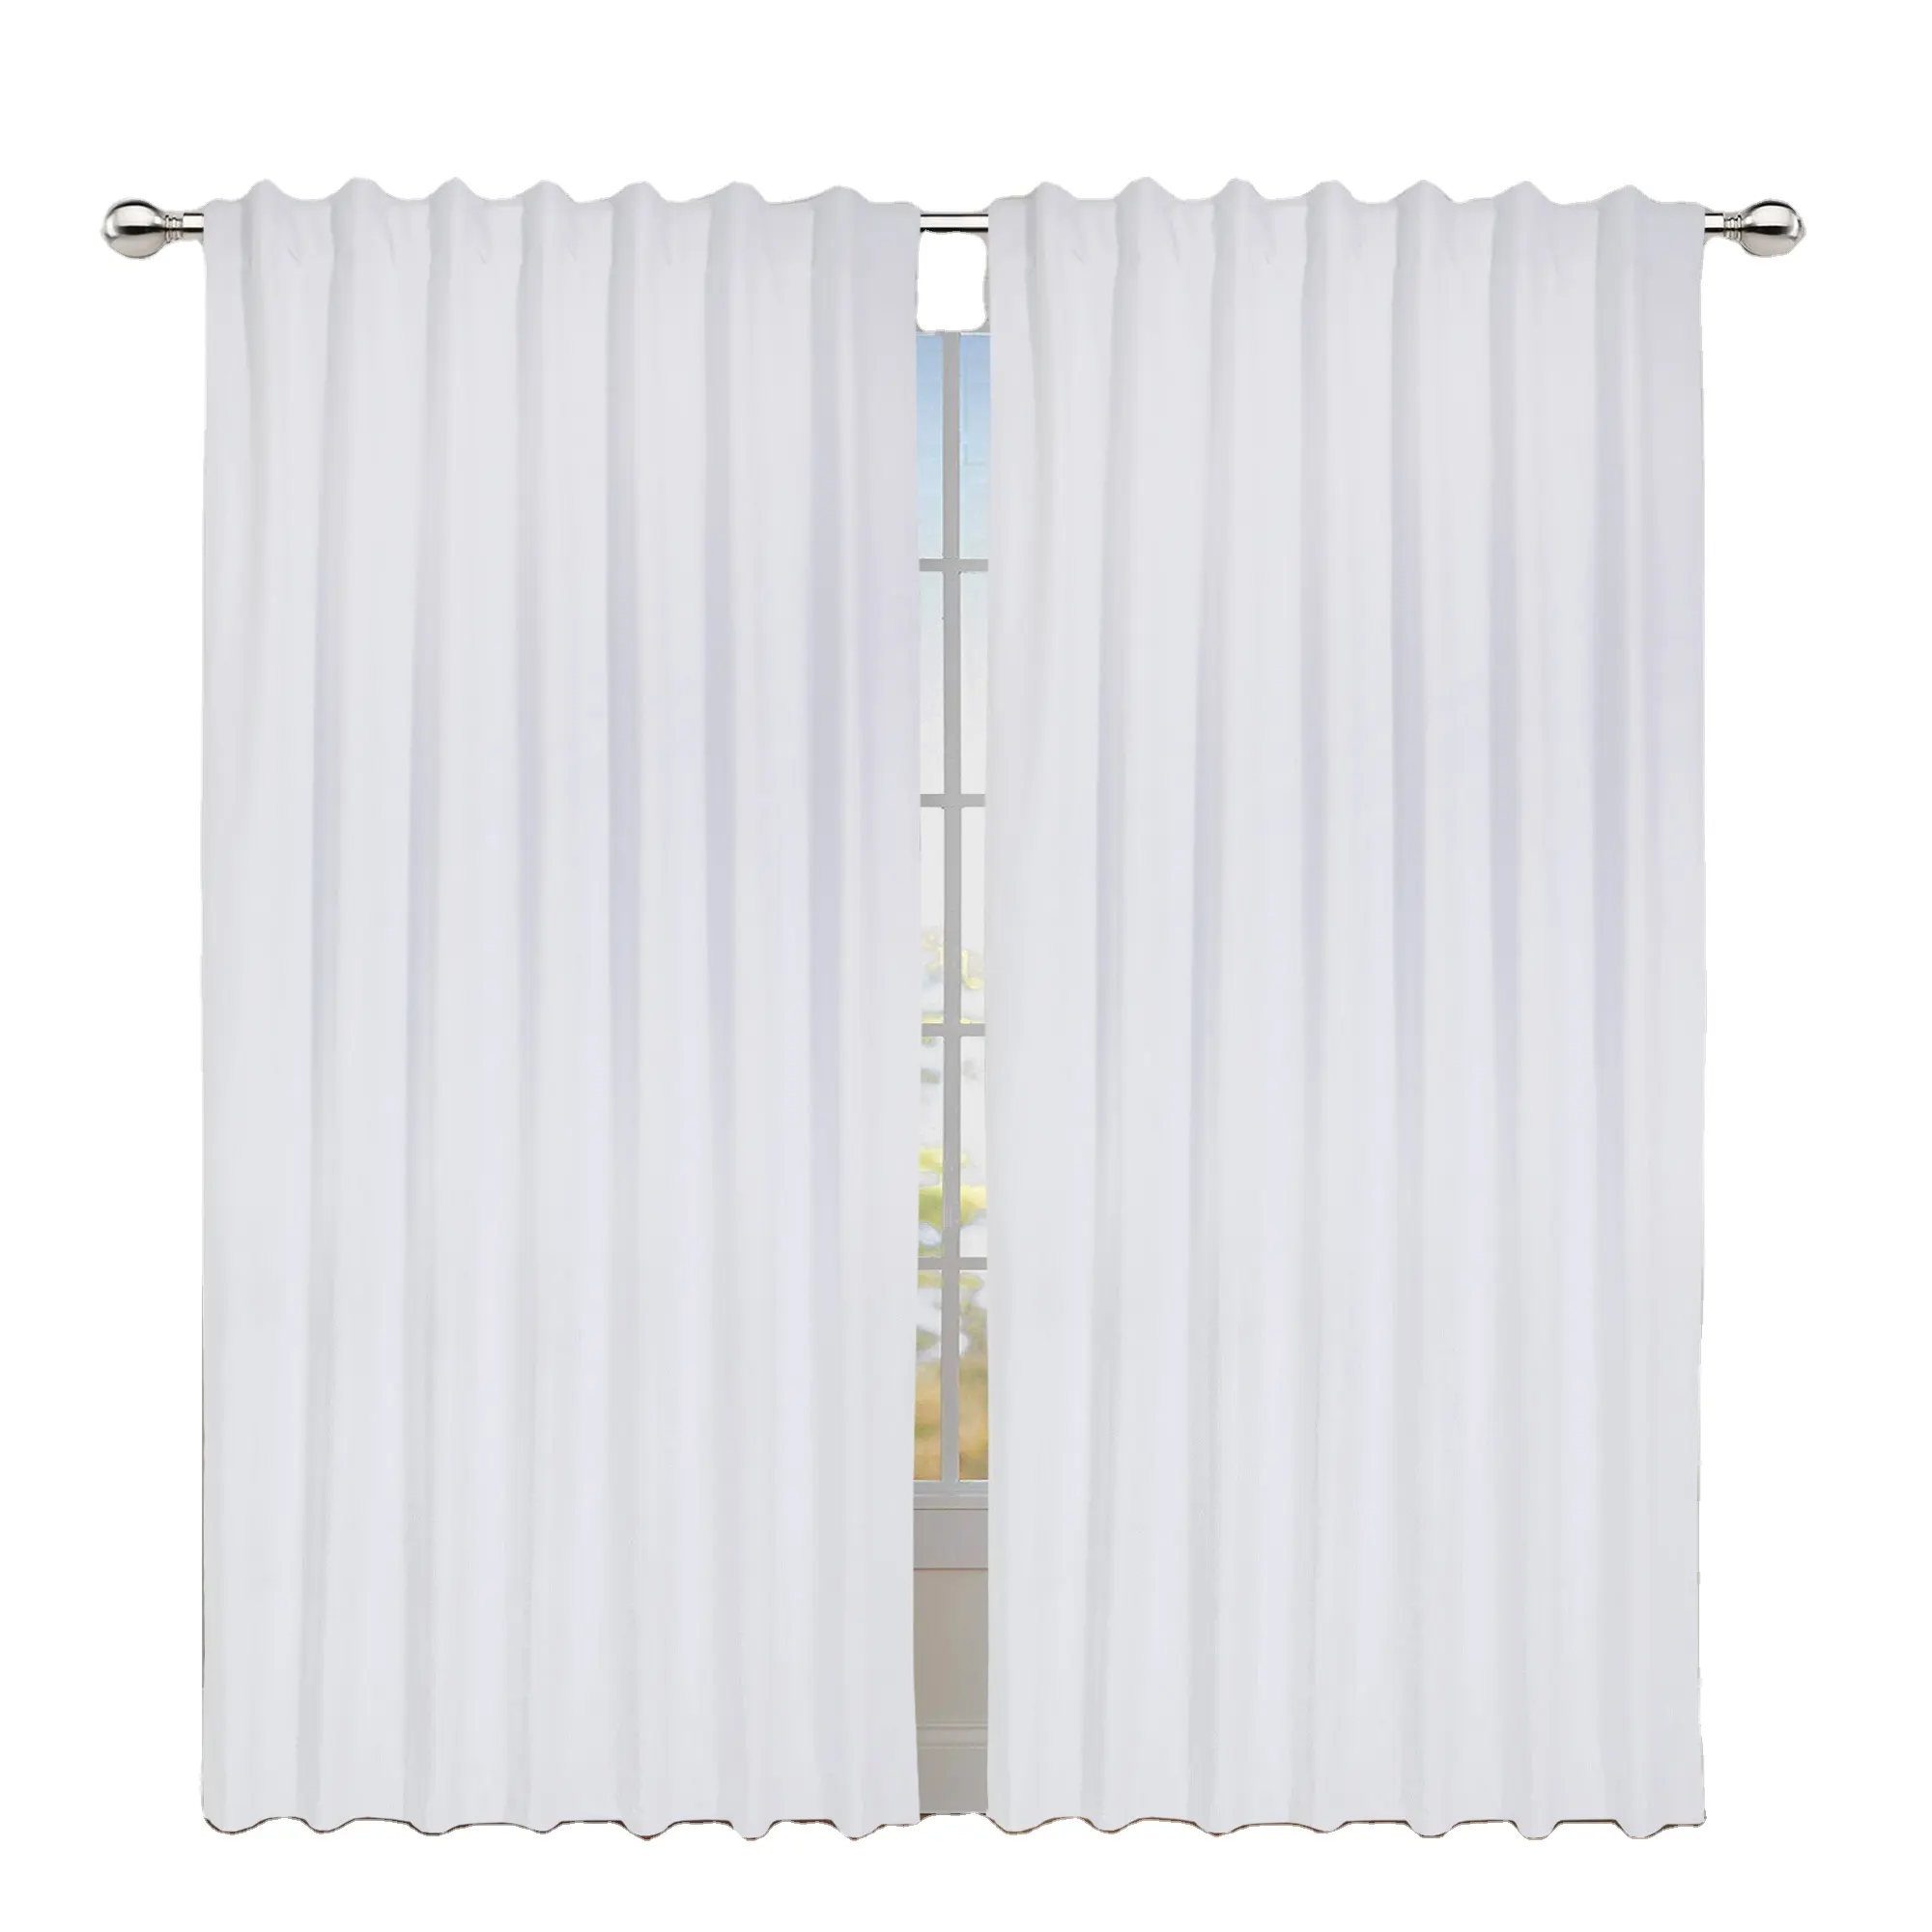 100% Blackout Window Curtain Panels, Heat and Full Light Blocking Drapes for Nursery, 84 inches Drop Thermal Insulated Draperies